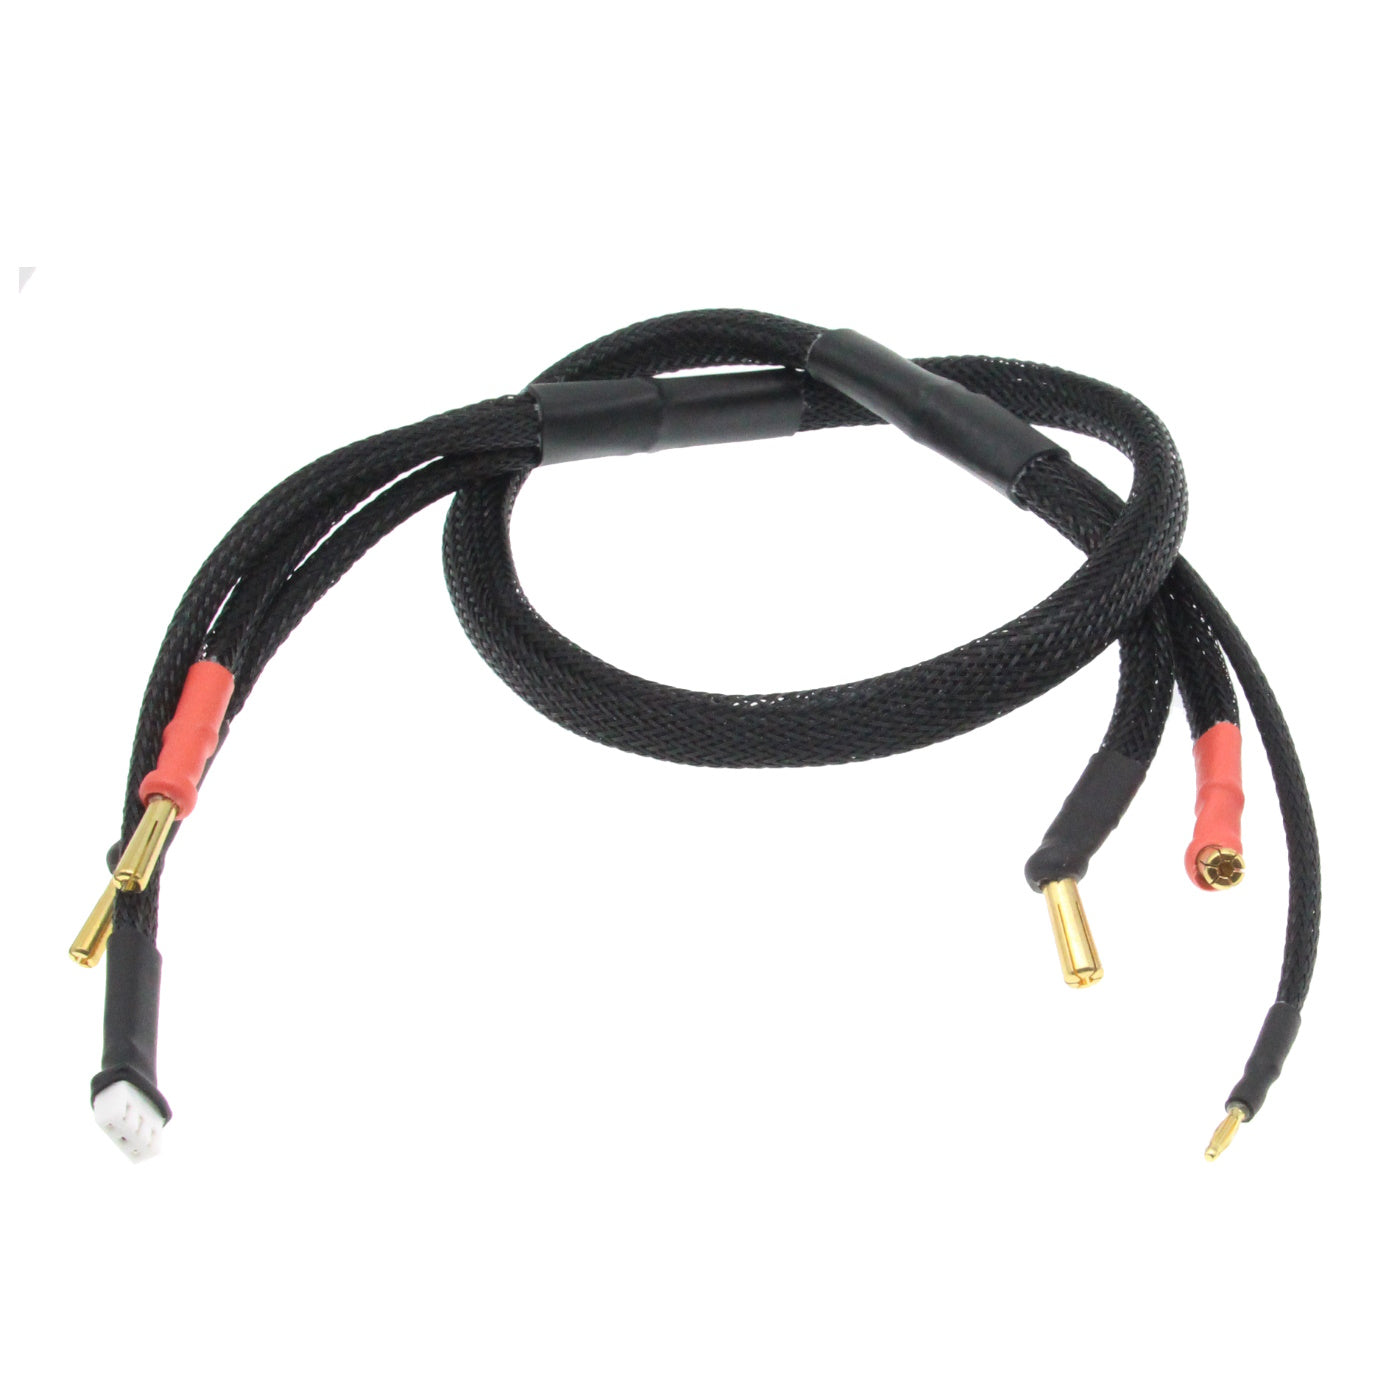 Powerhobby Charging Cable 2S 5mm / 2mm battery to 4mm/xh 3pin charger.